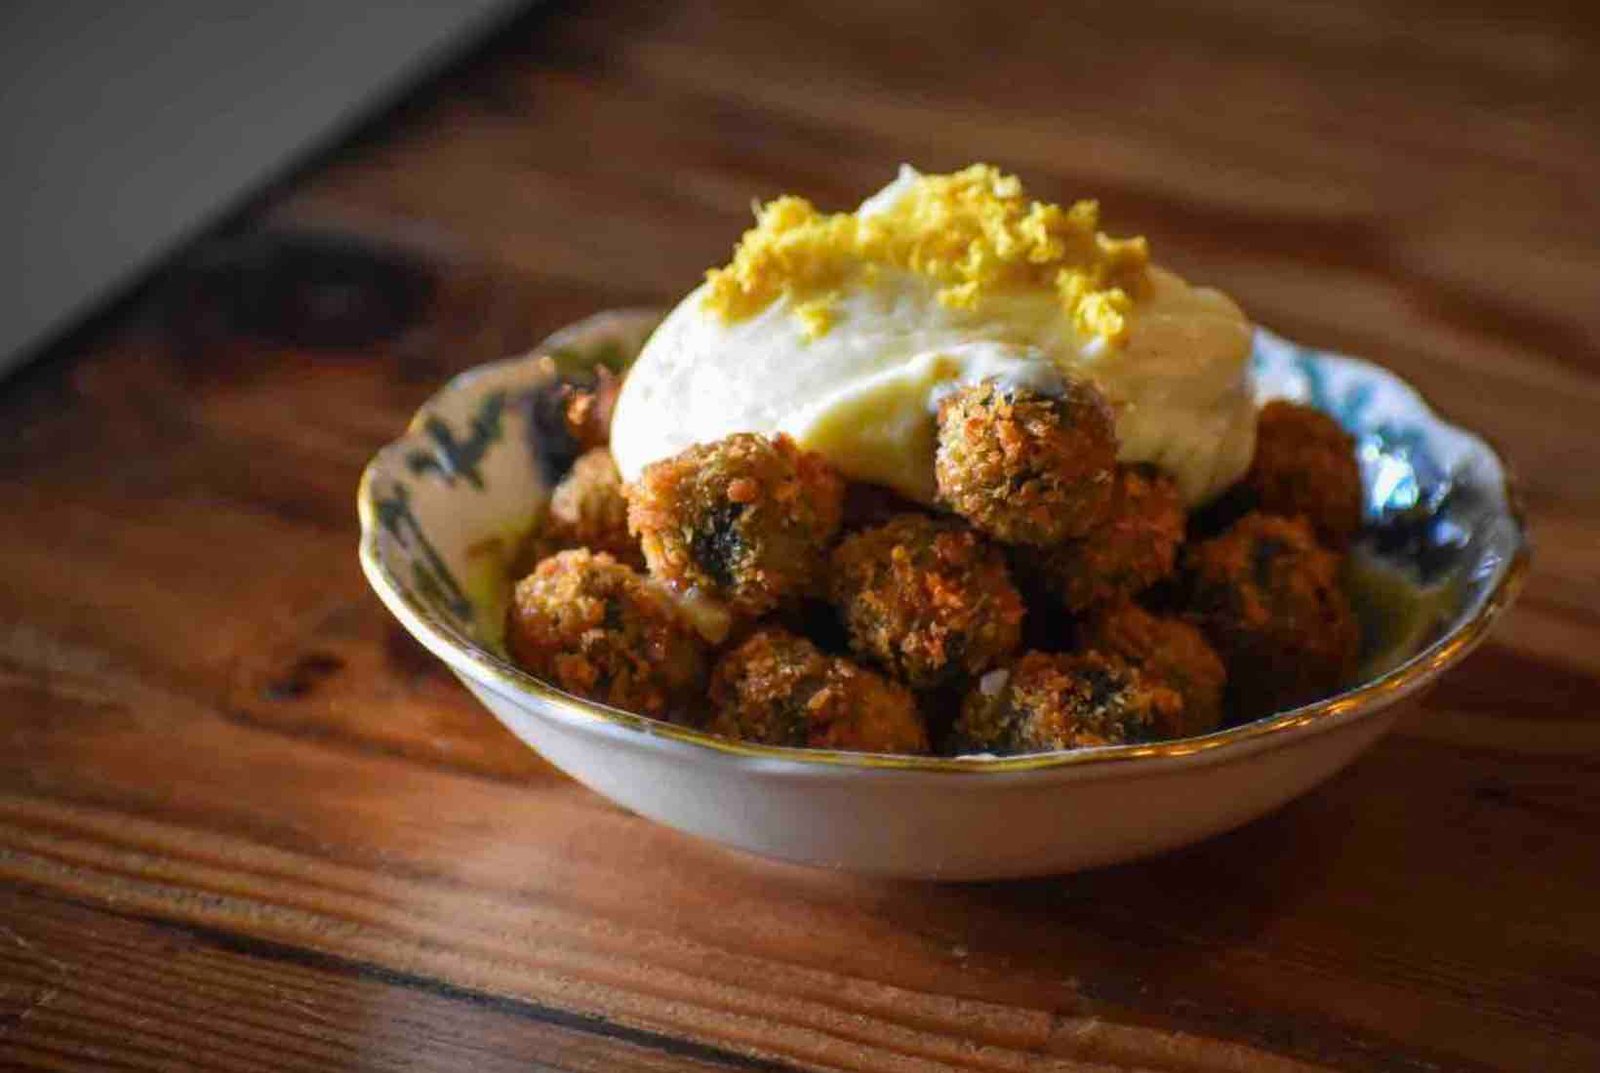 The fried olives, stuffed with n'duja salami and topped with lemon aioli from Wood & Salt. Photo by Brian Addison.